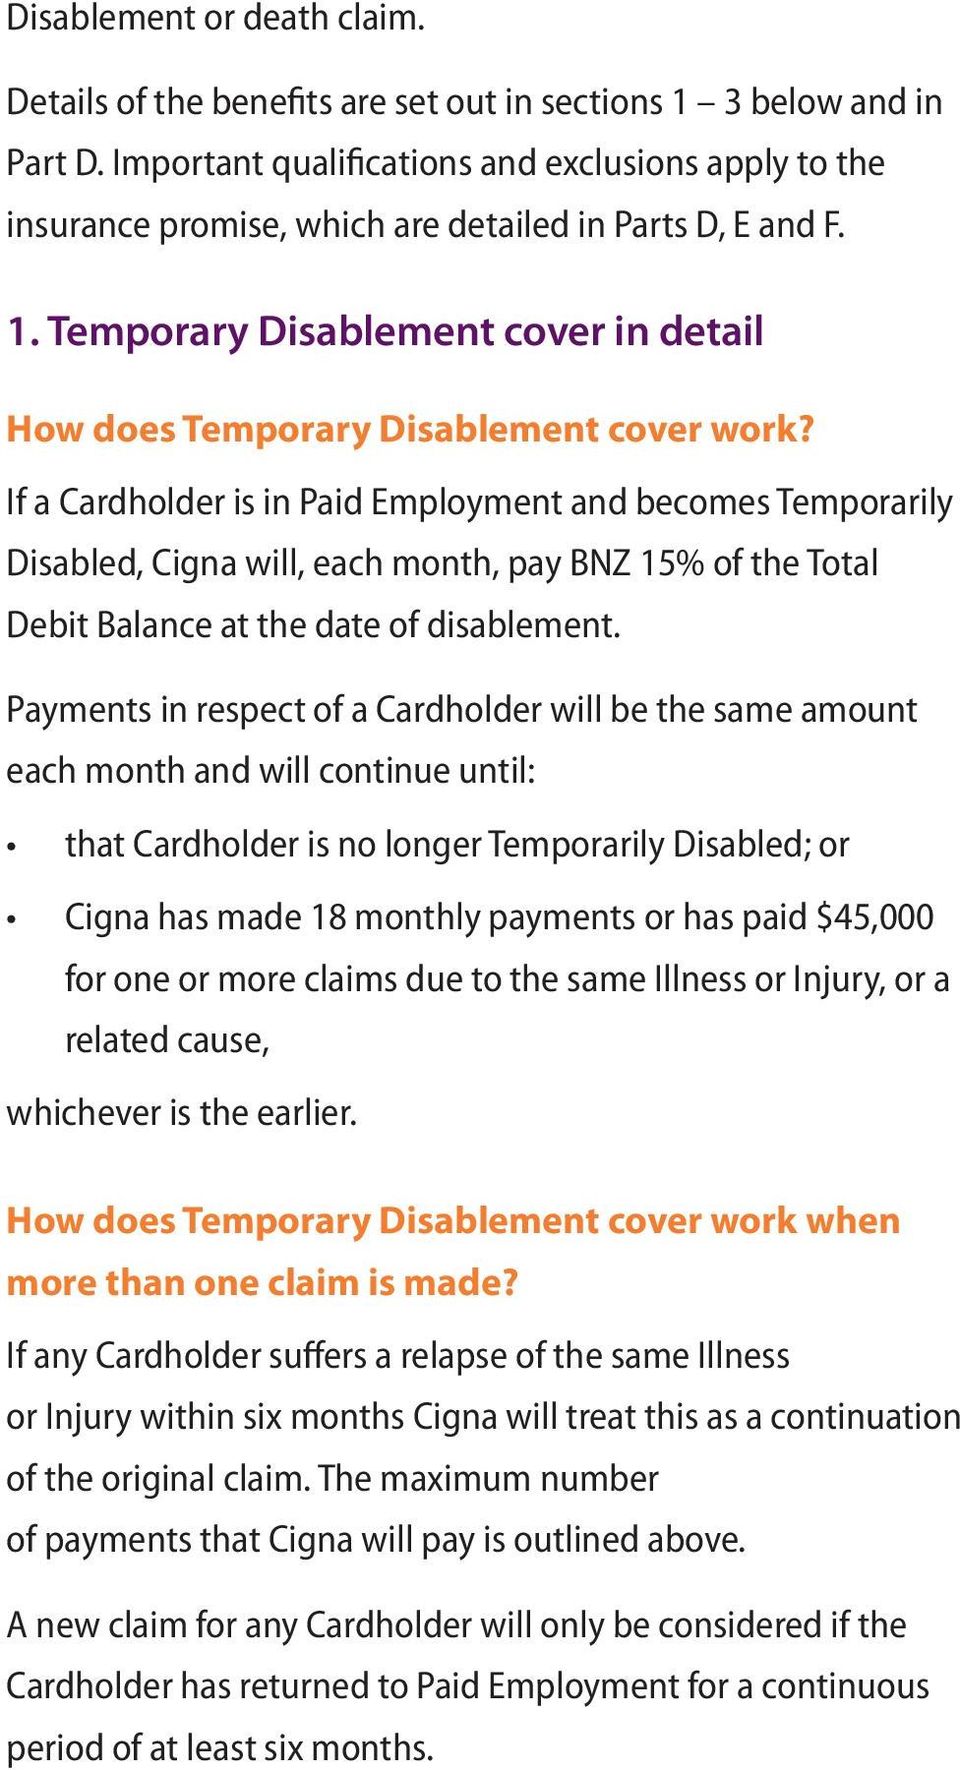 If a Cardholder is in Paid Employment and becomes Temporarily Disabled, Cigna will, each month, pay BNZ 15% of the Total Debit Balance at the date of disablement.